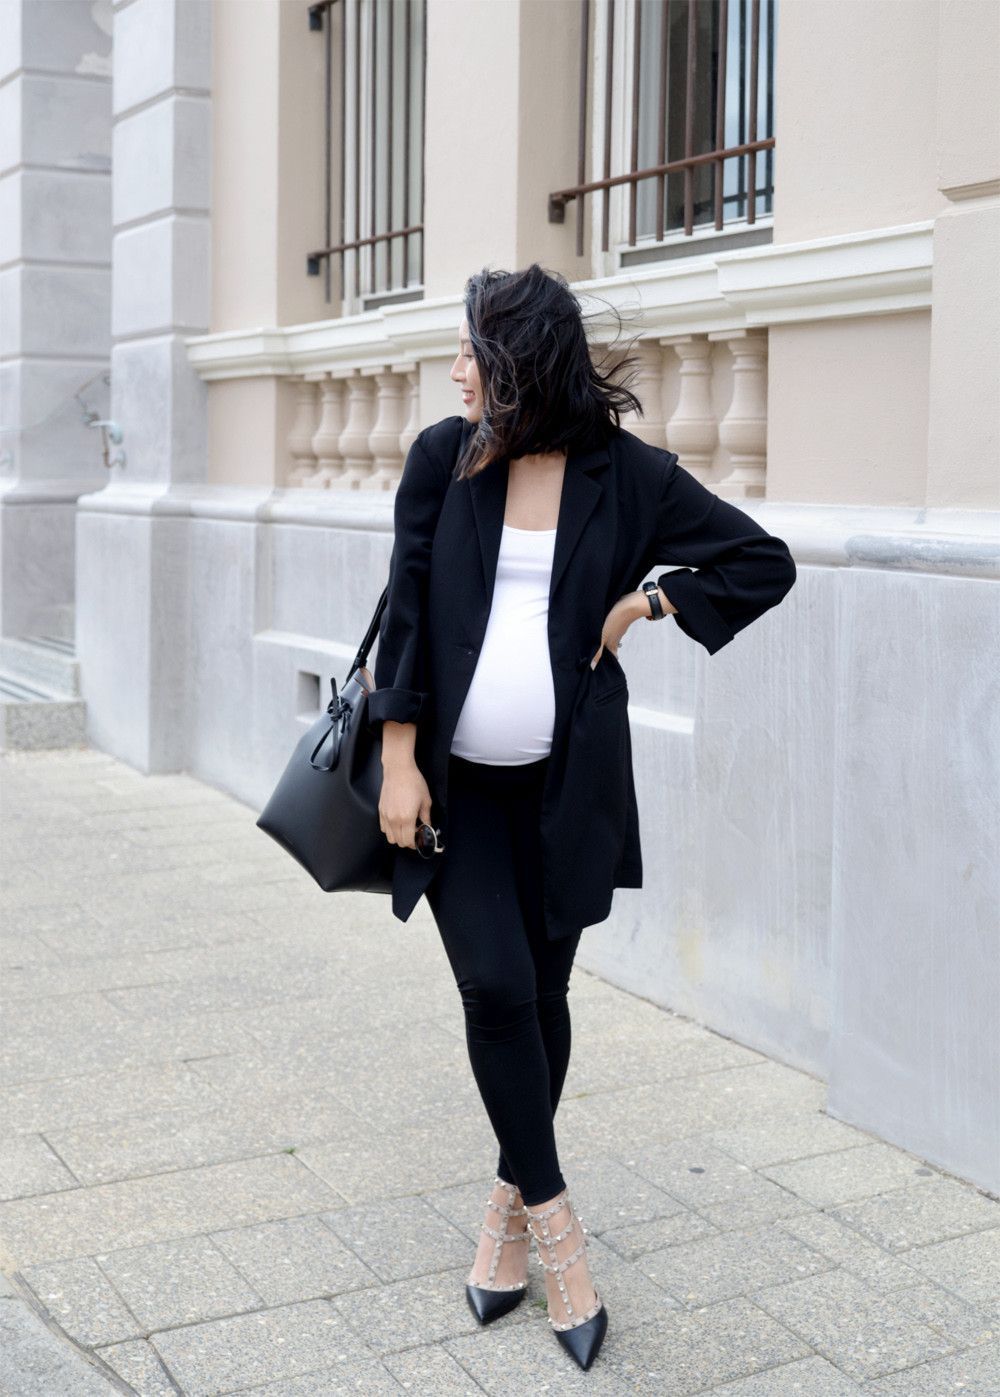 How to avoid buying maternity clothes during pregnancy - Vogue Australia